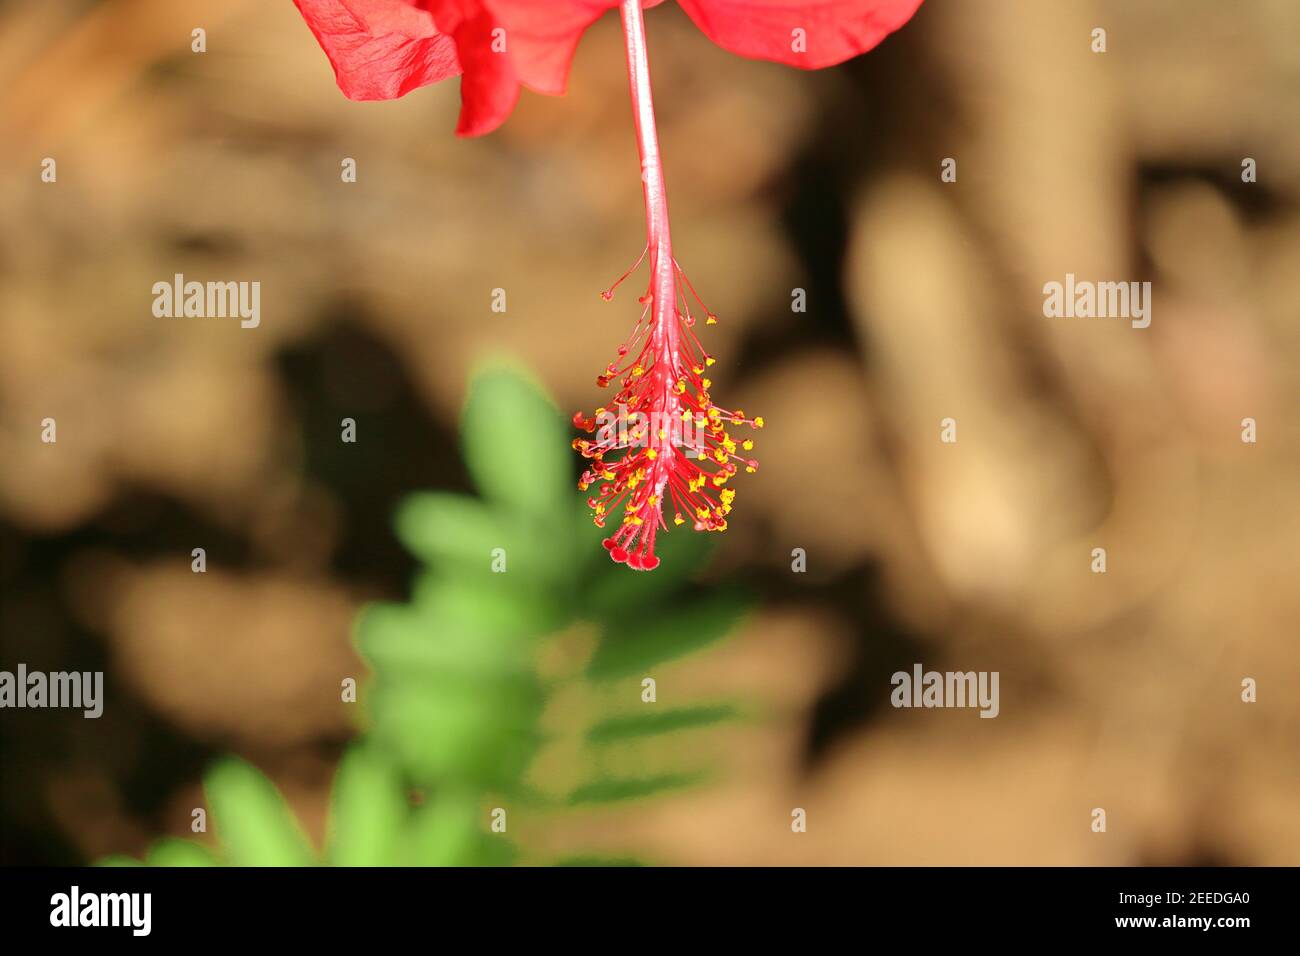 macro shot of A red hibiscus flower pollen was shown, india-Asia Stock Photo